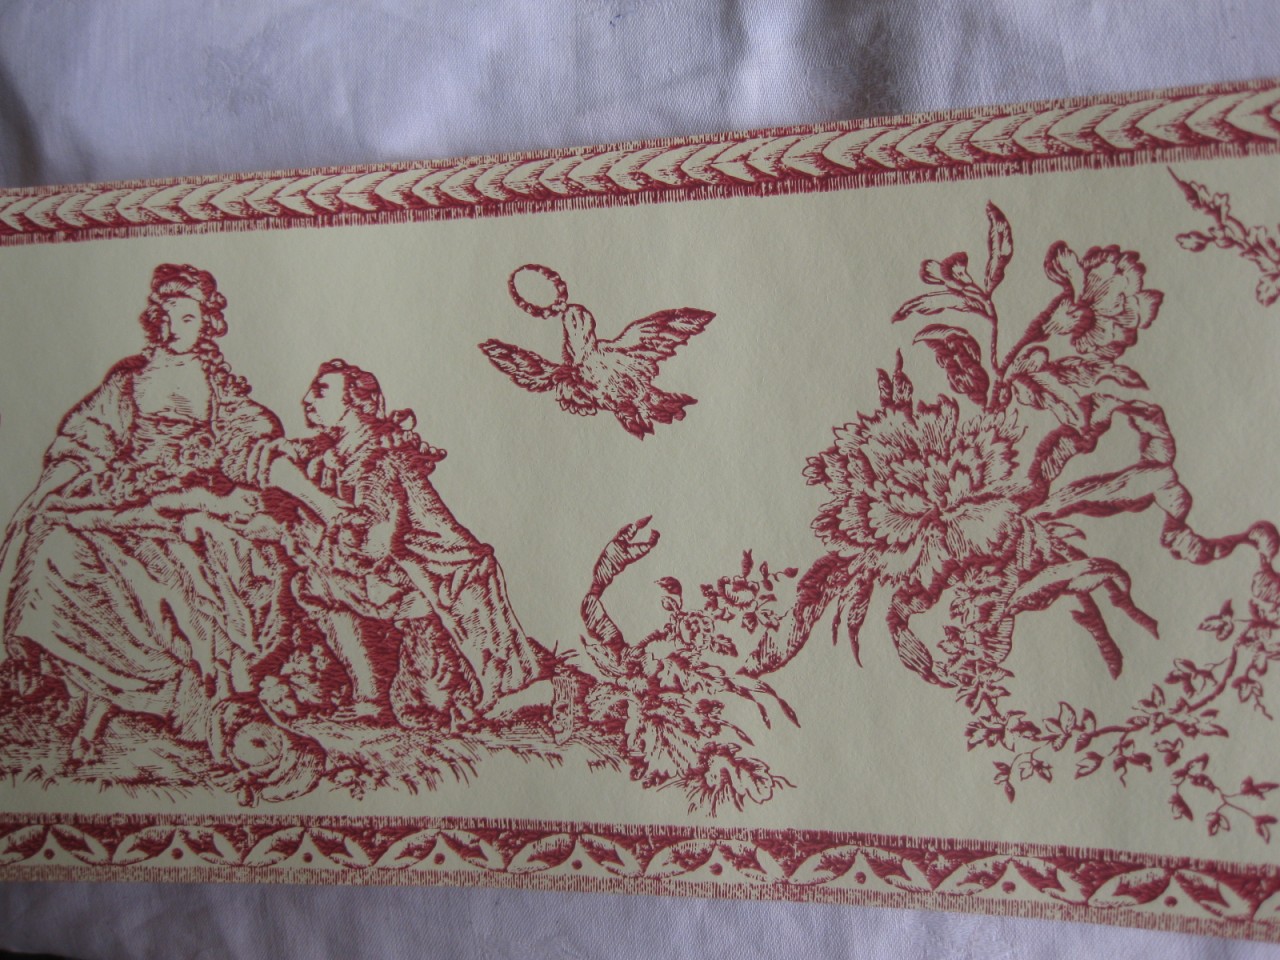 Details about RED TOILE YELLOW JOHN WILMAN WALLPAPER BORDERS BN